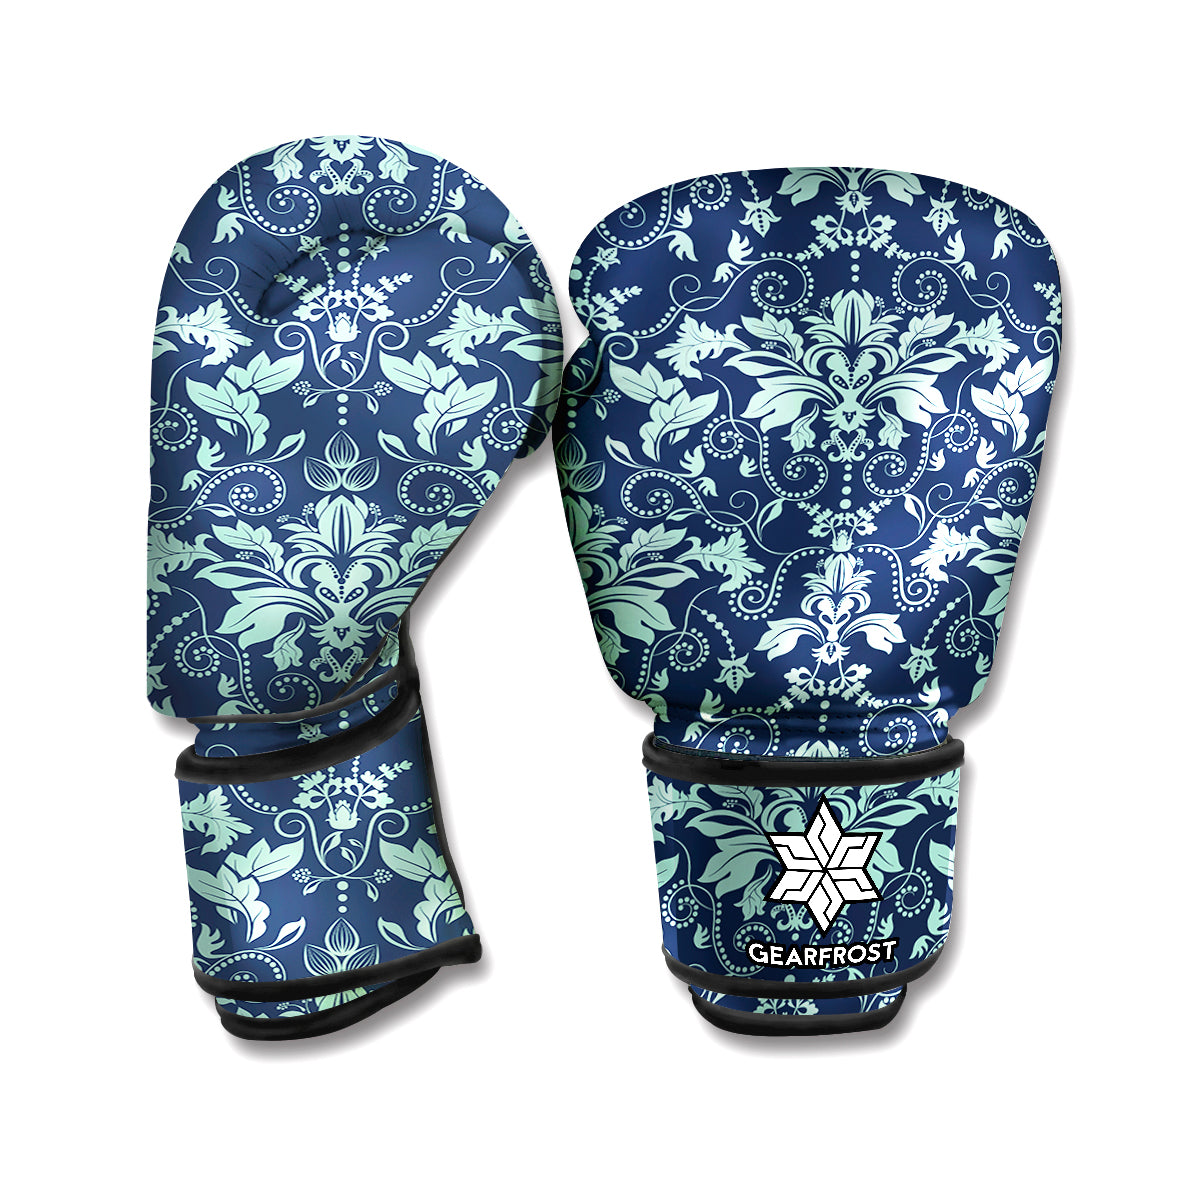 Blue And Teal Damask Pattern Print Boxing Gloves